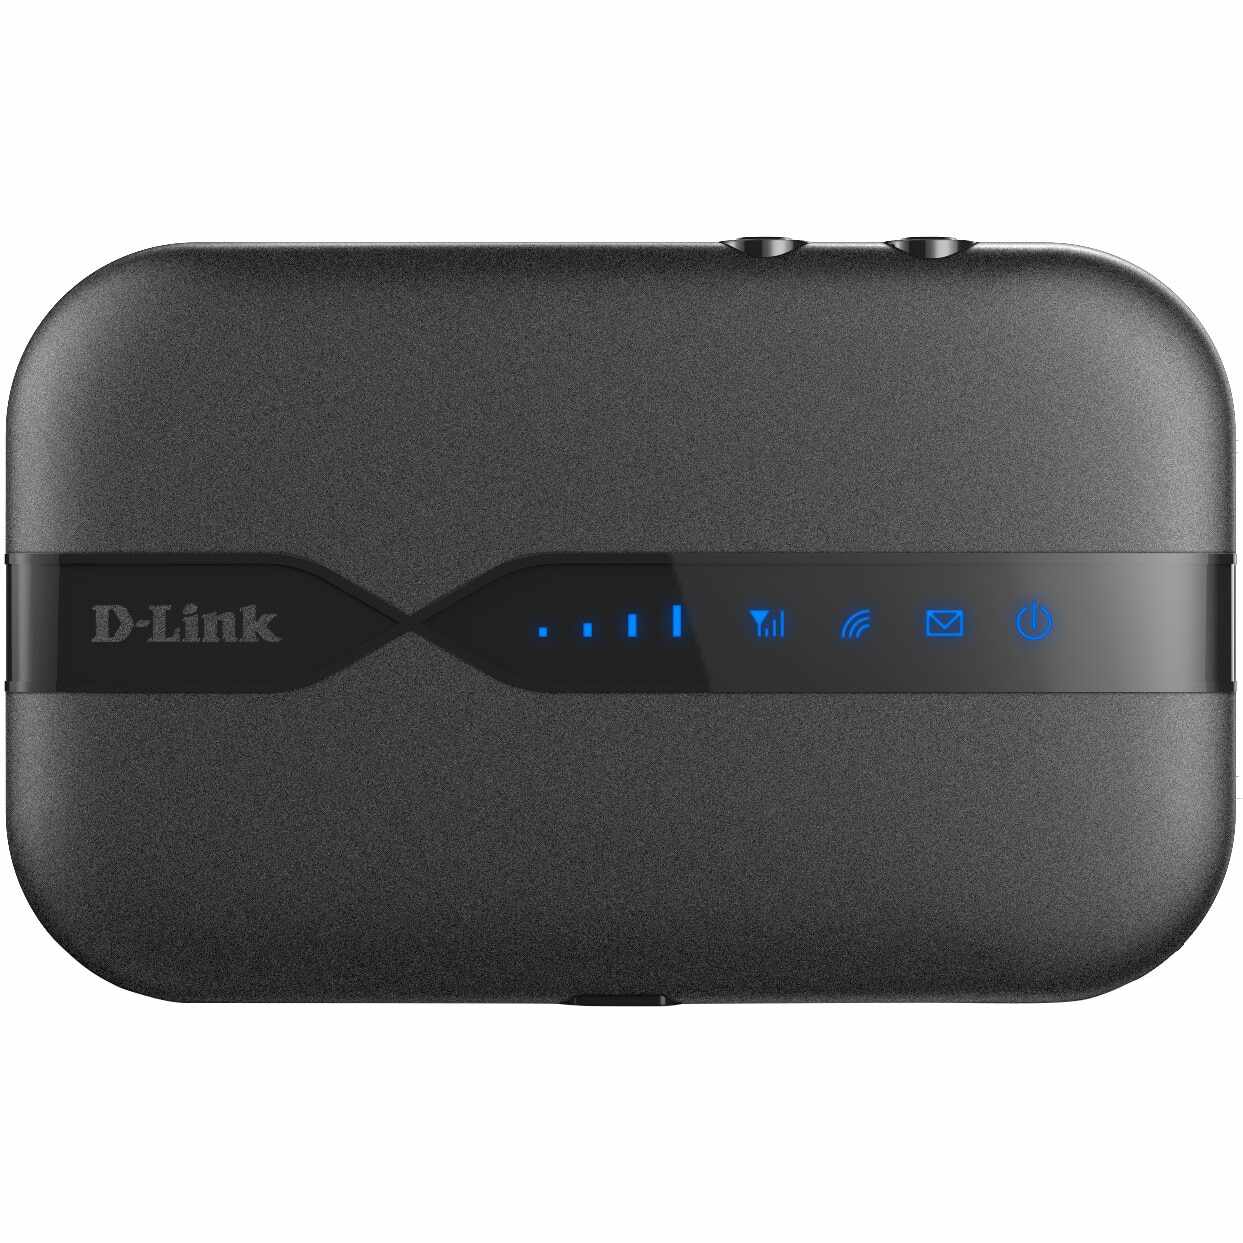 Router wireless Portable D-Link DWR‑932 4G LTE Mobile WiFi Hotspot 150 Mbps